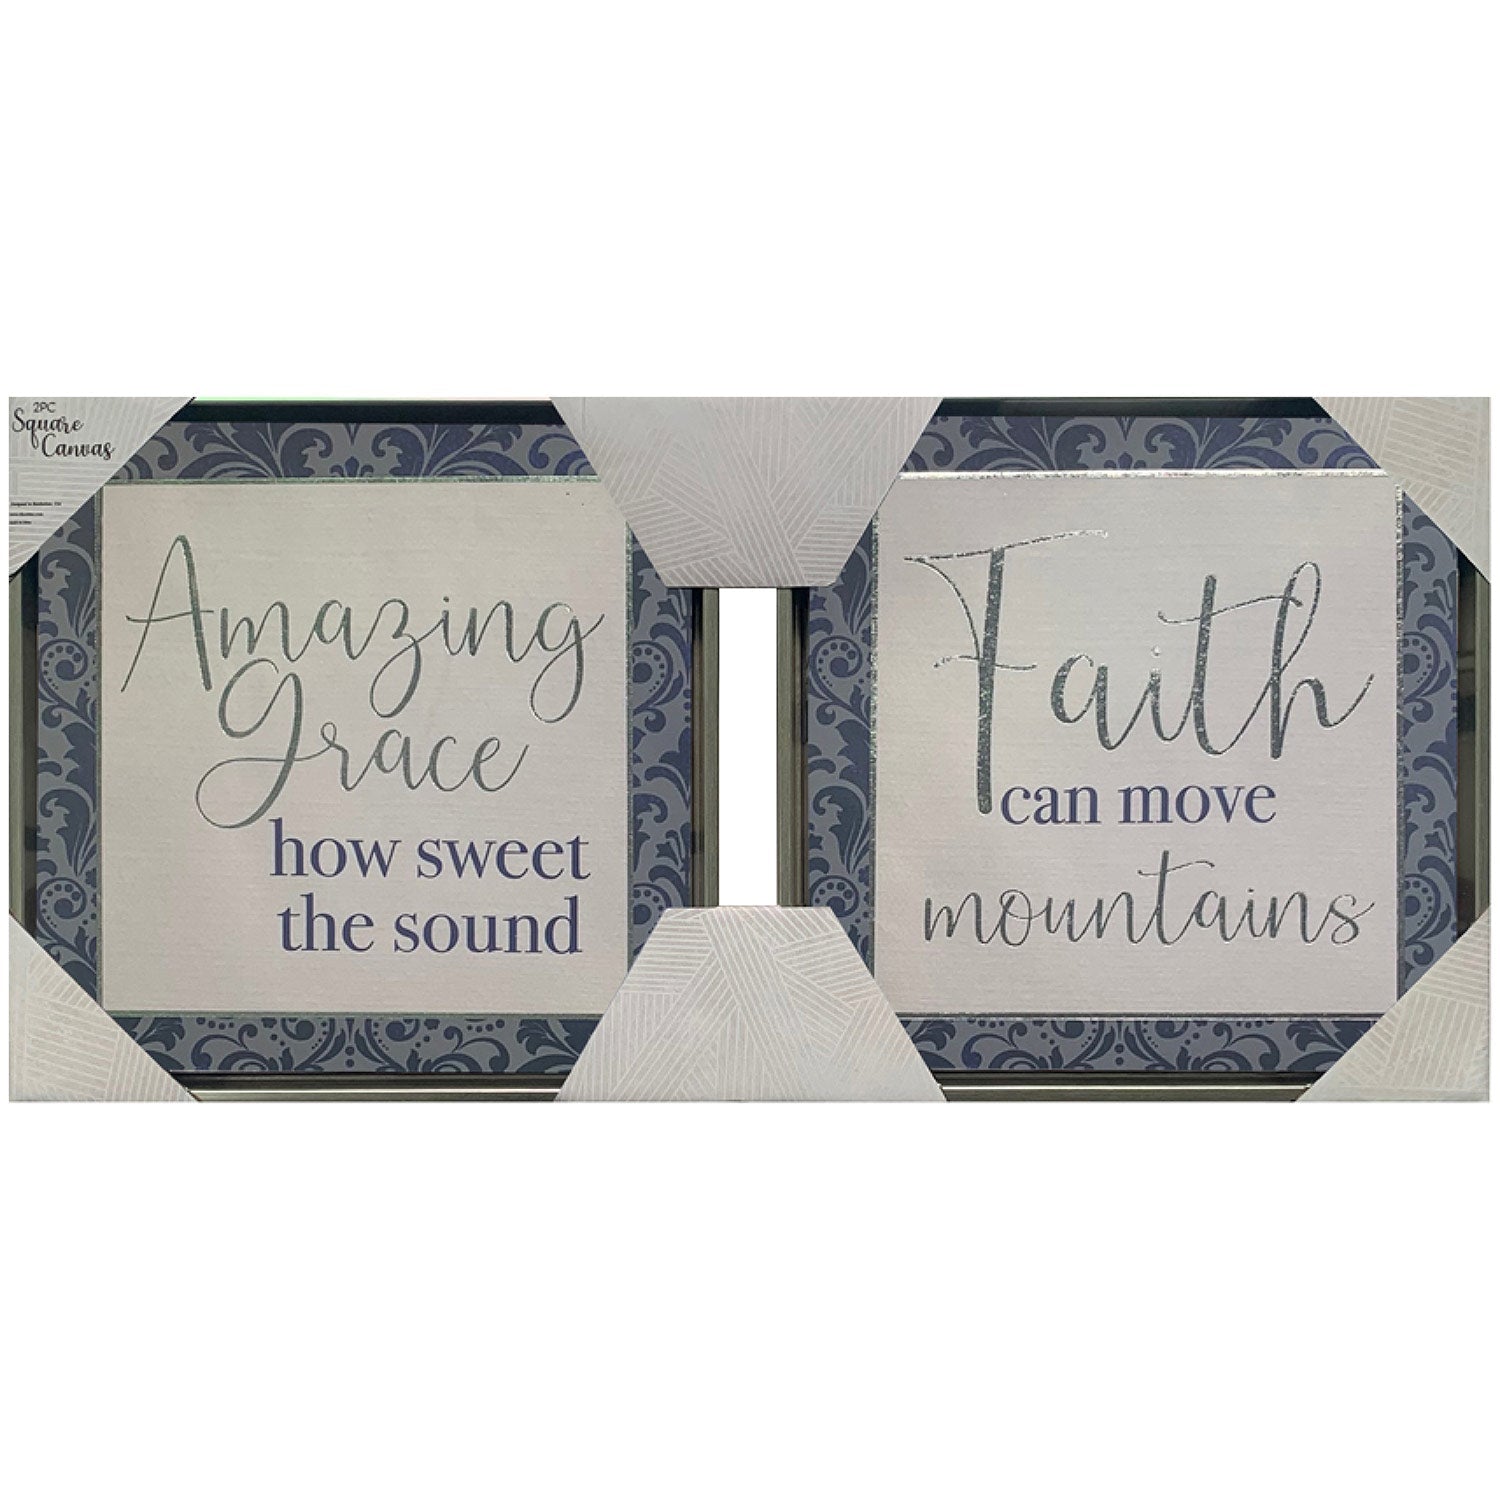 PREMIUS 2-Piece Amazing Grace And Faith Framed Wall Decor, 11x11 Inches Each